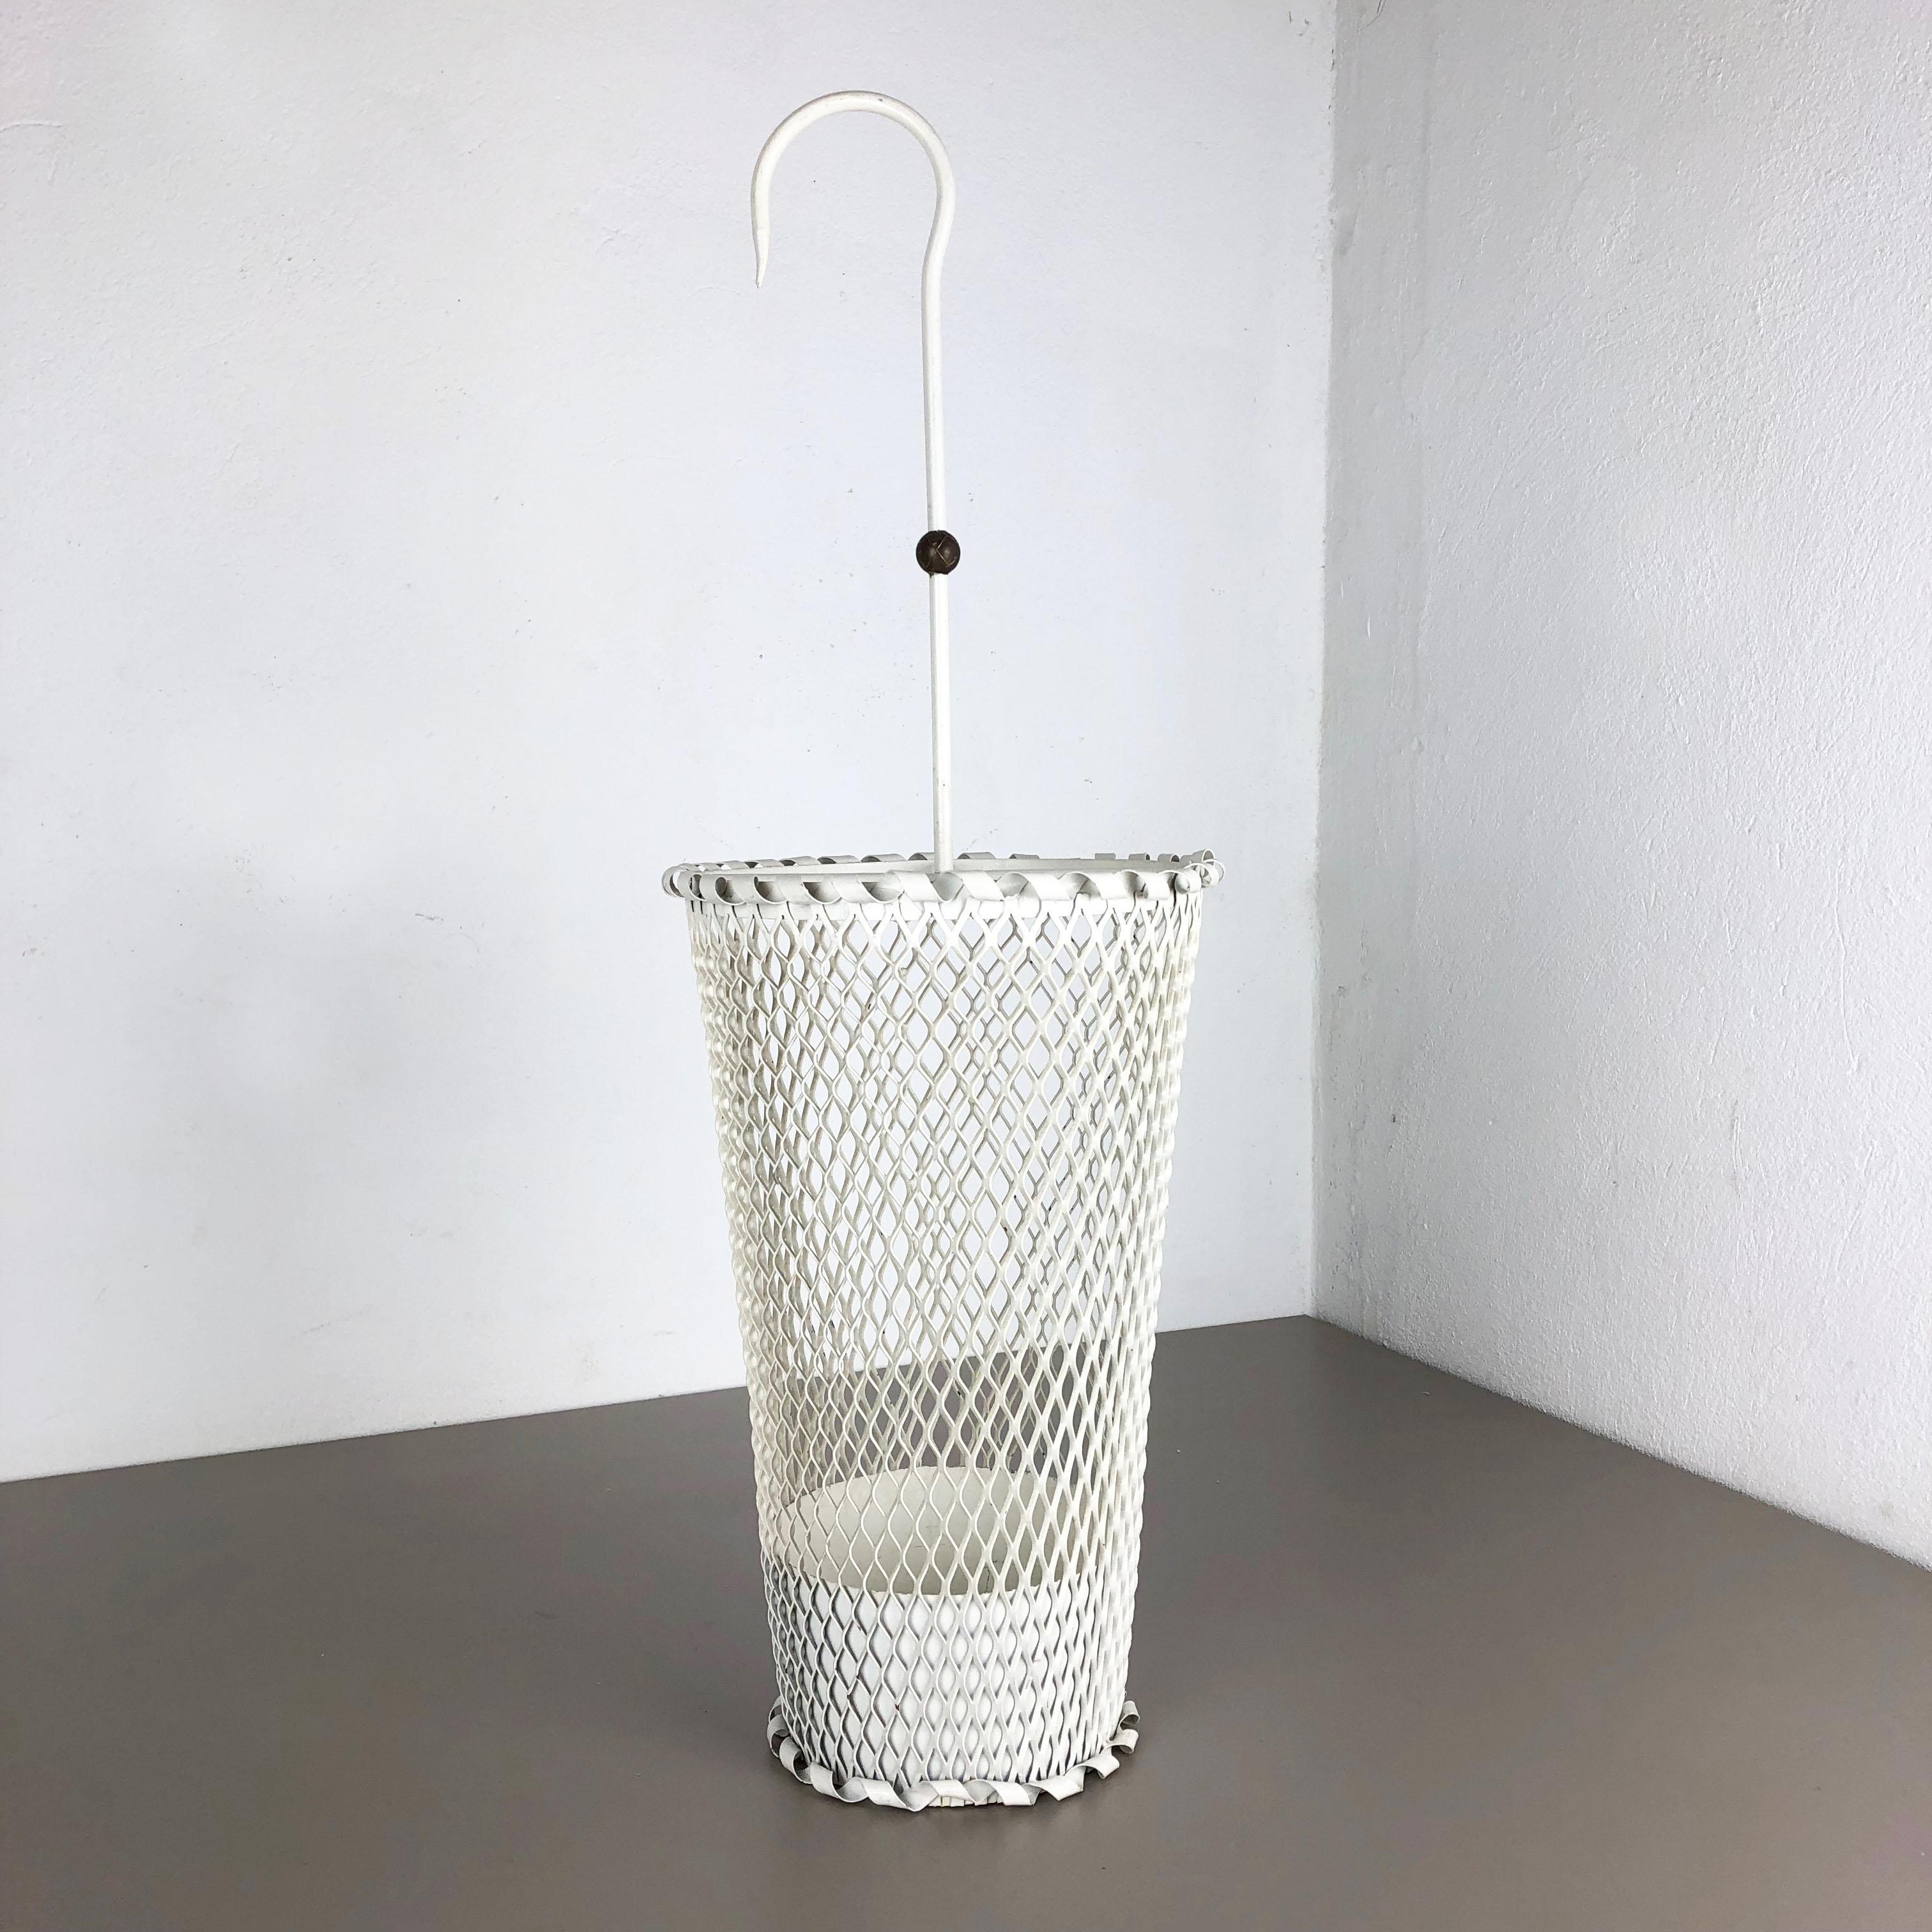 Article:

Umbrella stand in style of Matégot



Origin:

France


Age:

1950s





This original vintage umbrella stand was produced in the 1950s in France. It is made of solid metal in white lacquered tone. At the top this